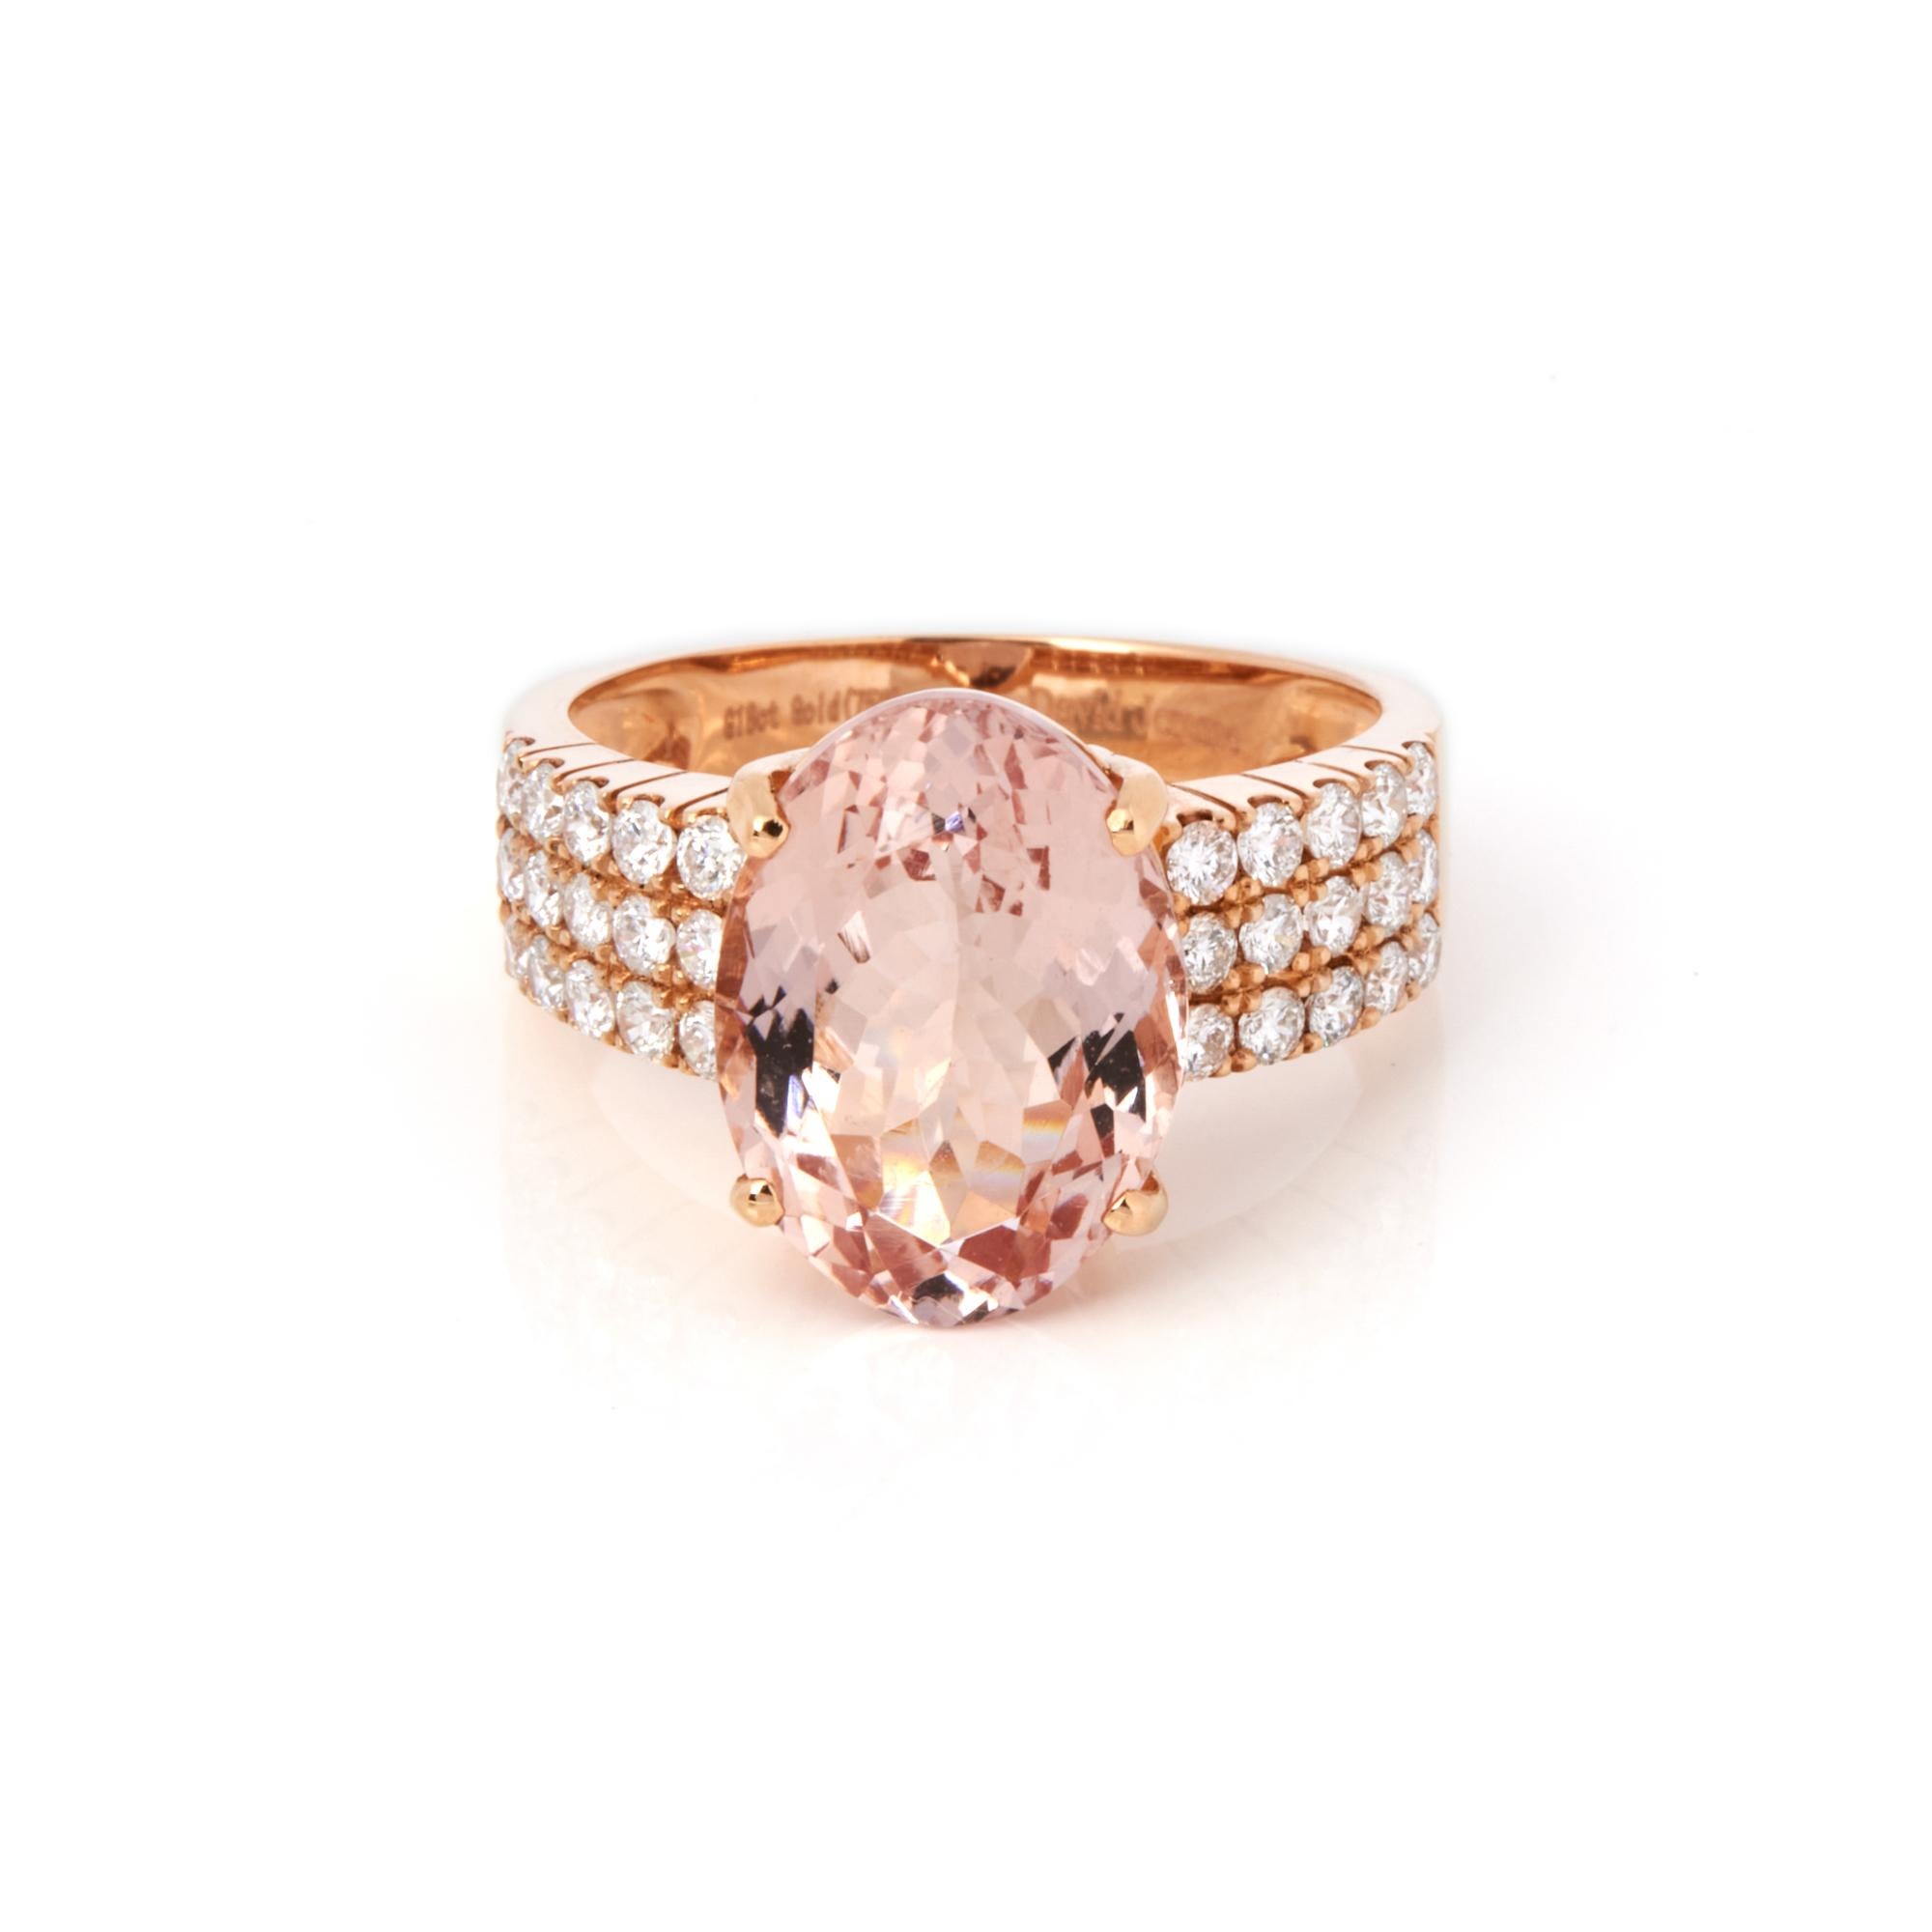 This ring is from the private collection of gemstone jewellery individually designed by David Jerome. It features an oval cut morganite set with diamonds. Accompanied by an IGITL gem certificate. UK ring size N. EU ring size 54. US ring size 7. 